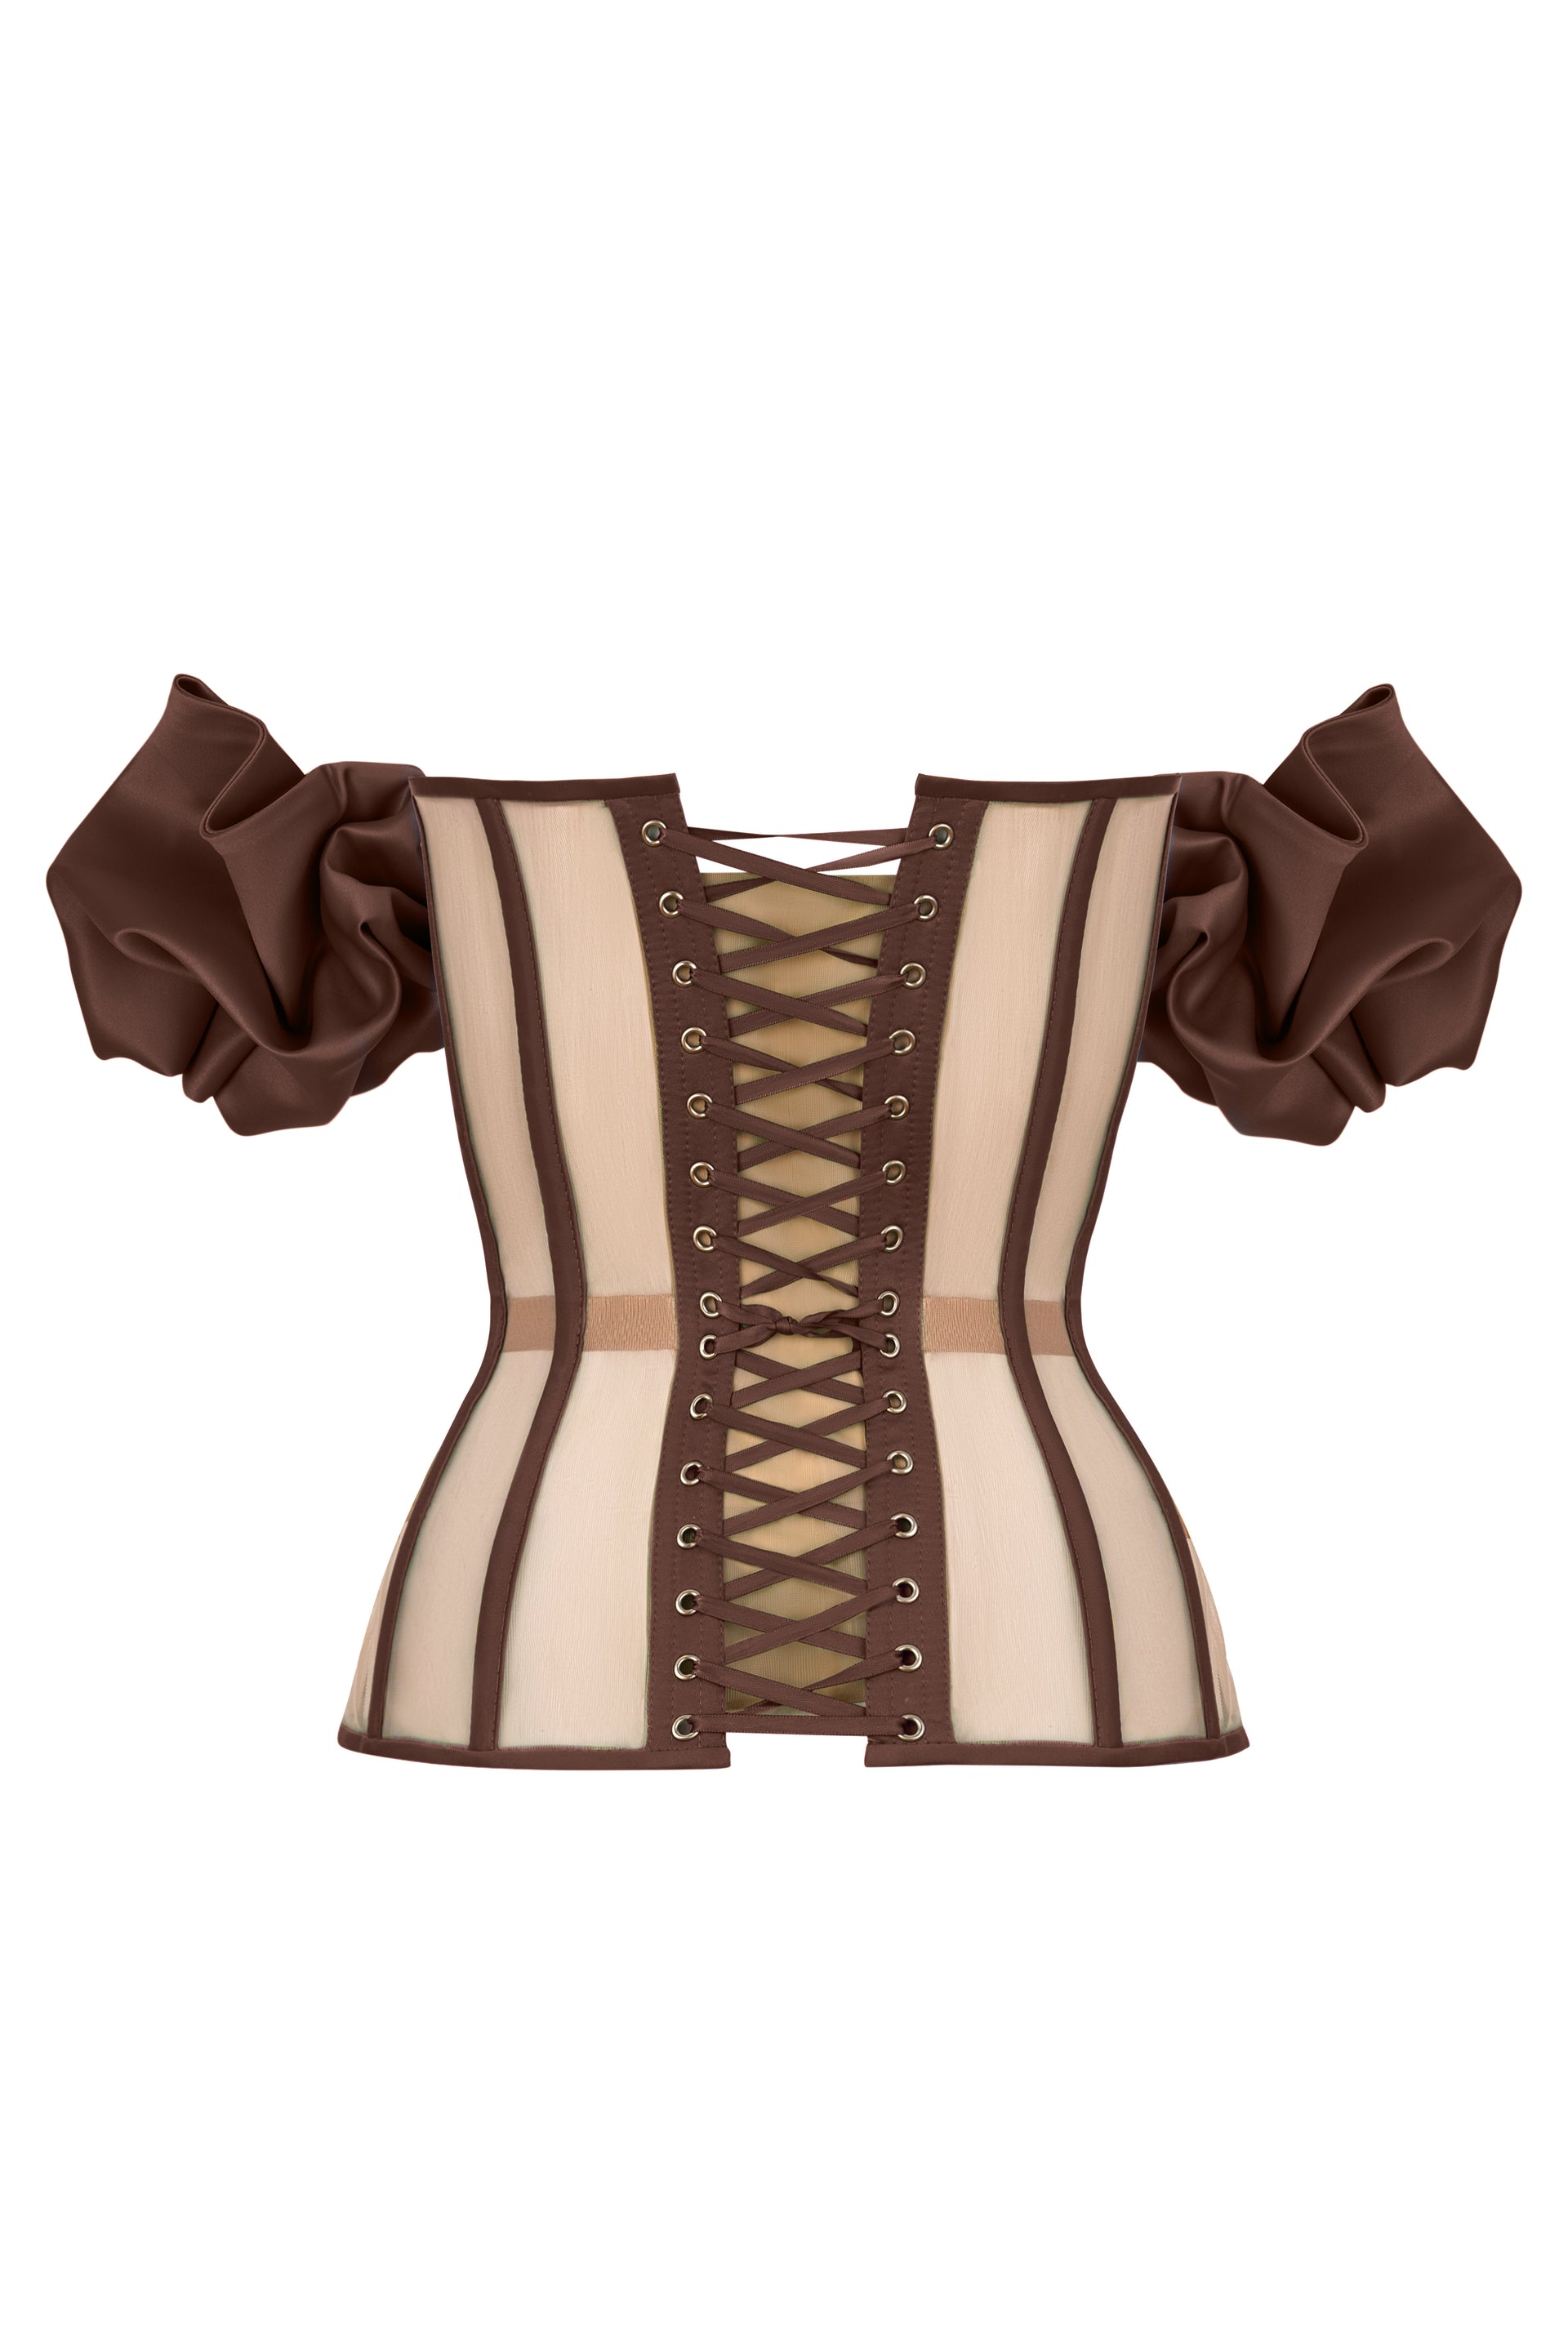 STATNAIA l Brown satin corset with with transparent back and detachable  sleeves